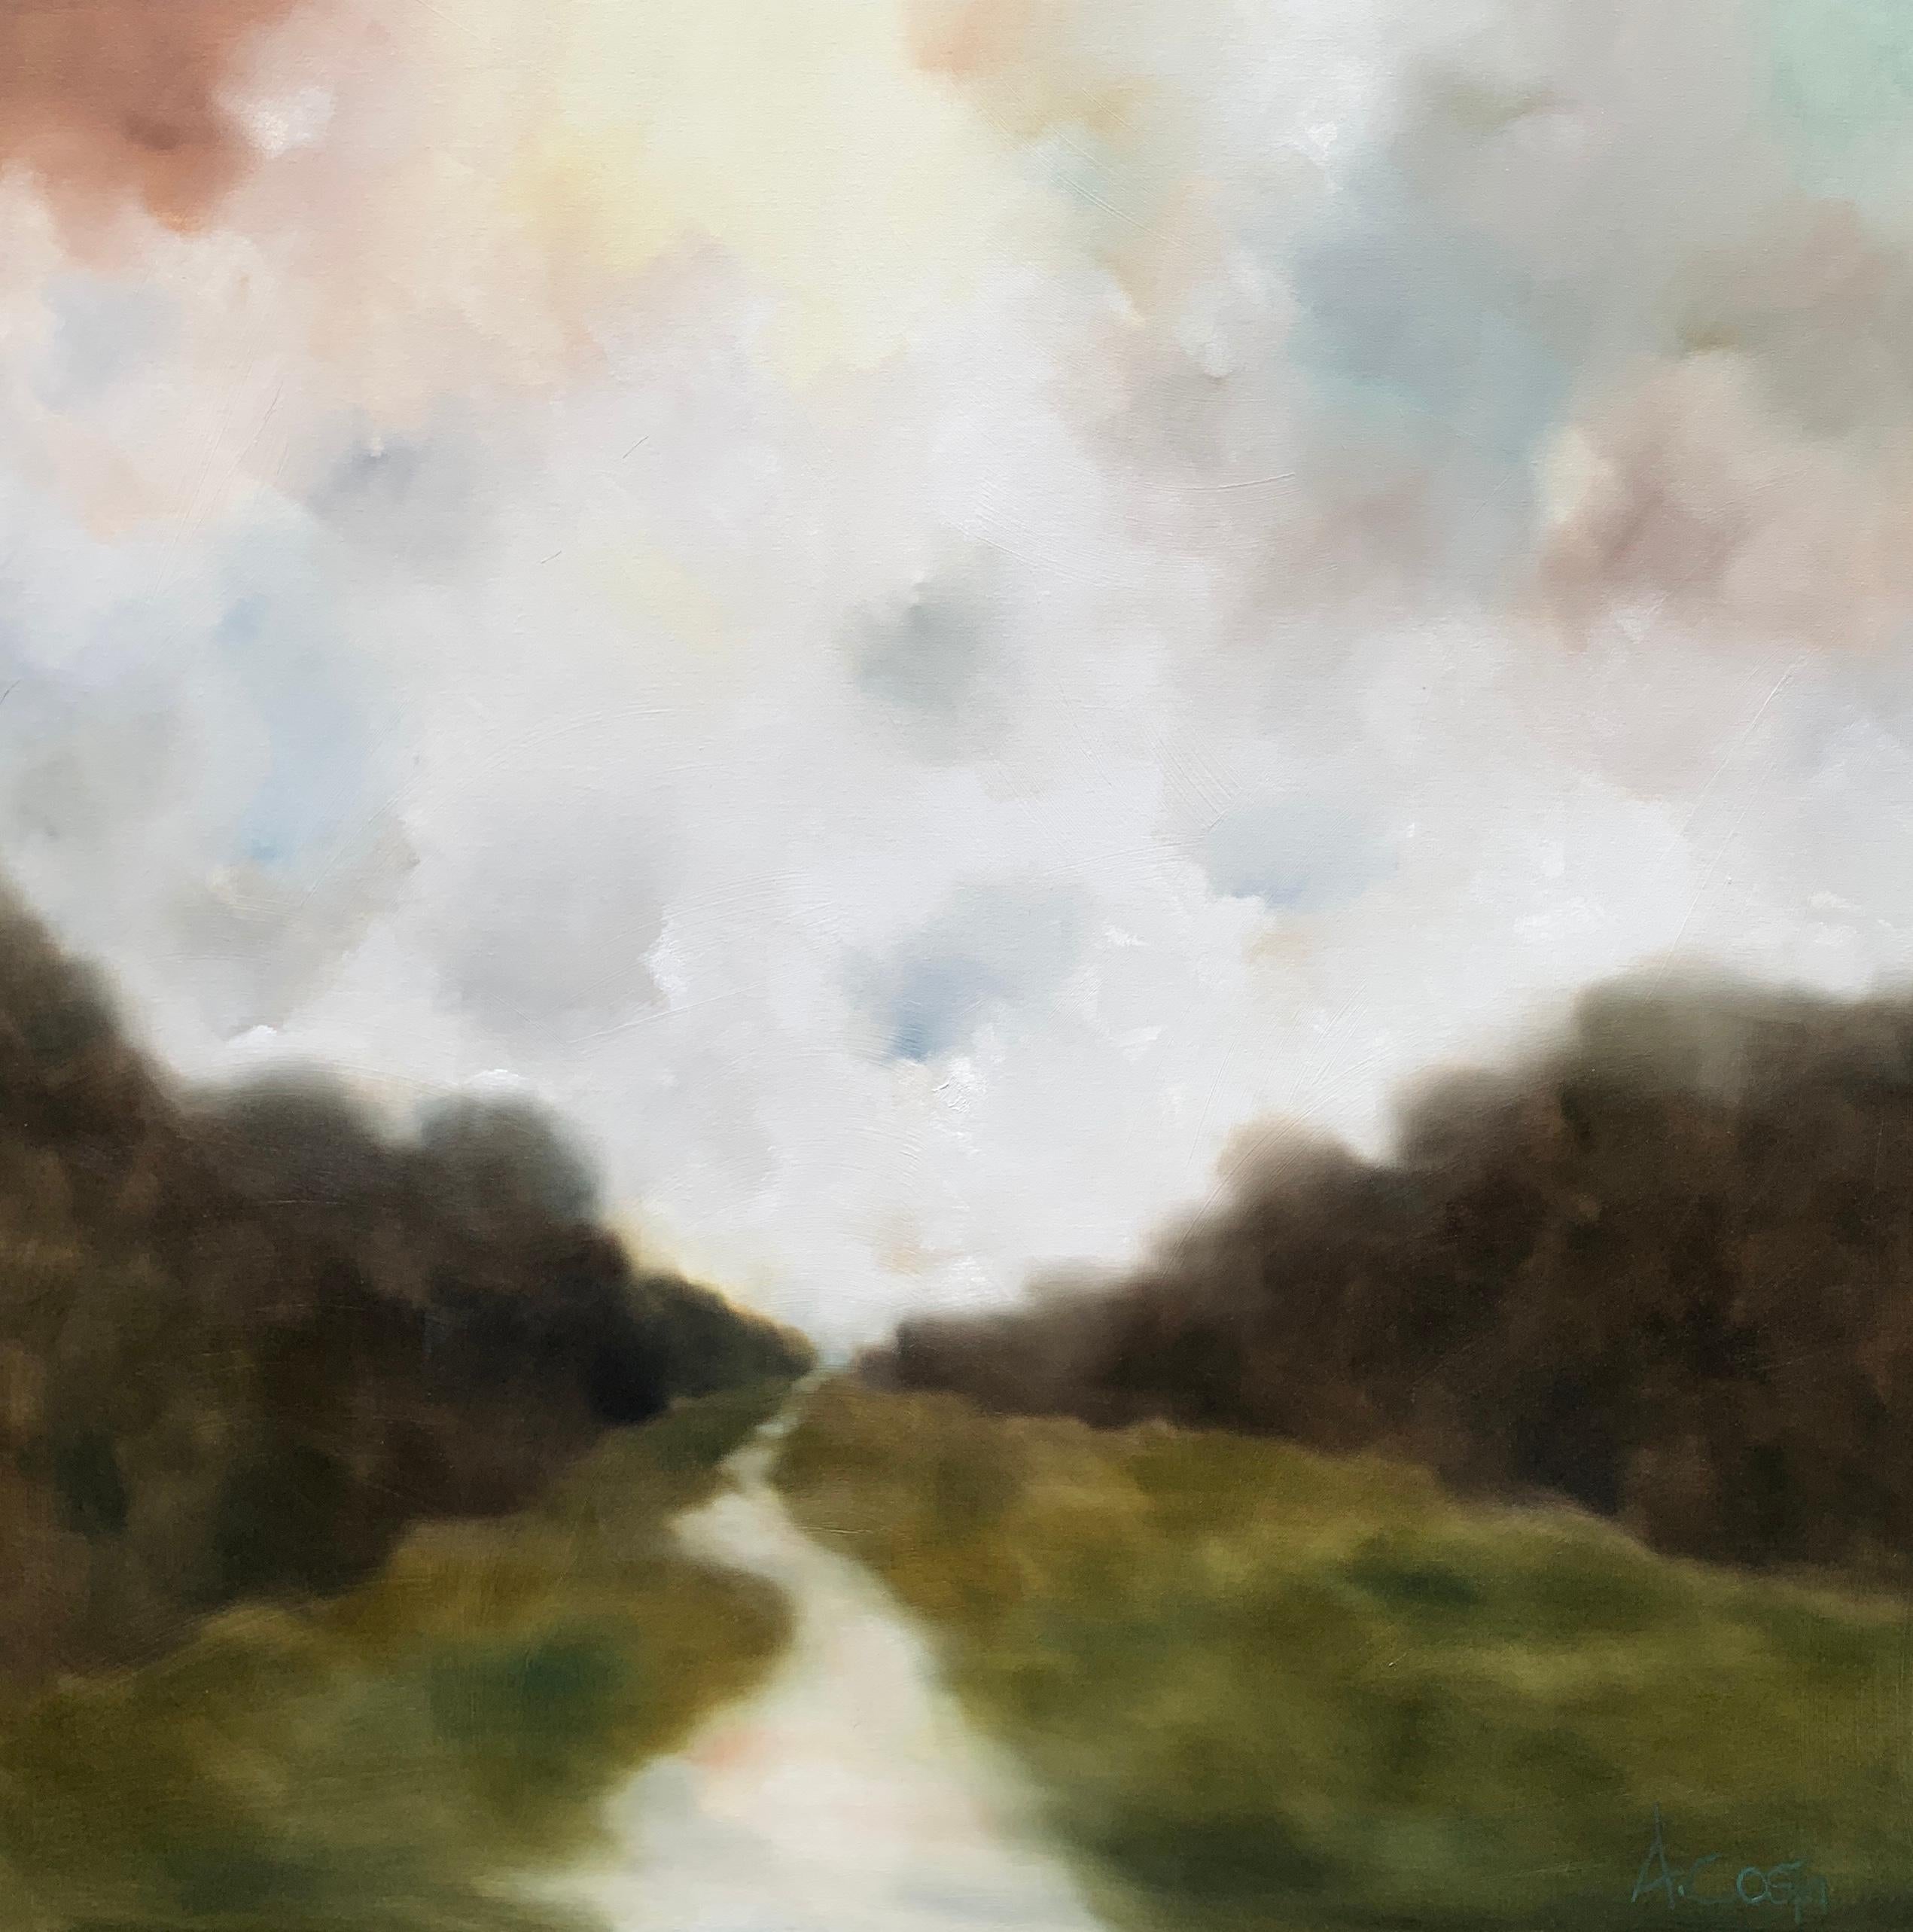 'The Path Back to Myself' is a large Impressionist oil on gesso landscape painting of square format created by American artist Andrea Costa in 2019. Featuring a palette made of green, brown, white and soft blue tonalities, the painting depicts a